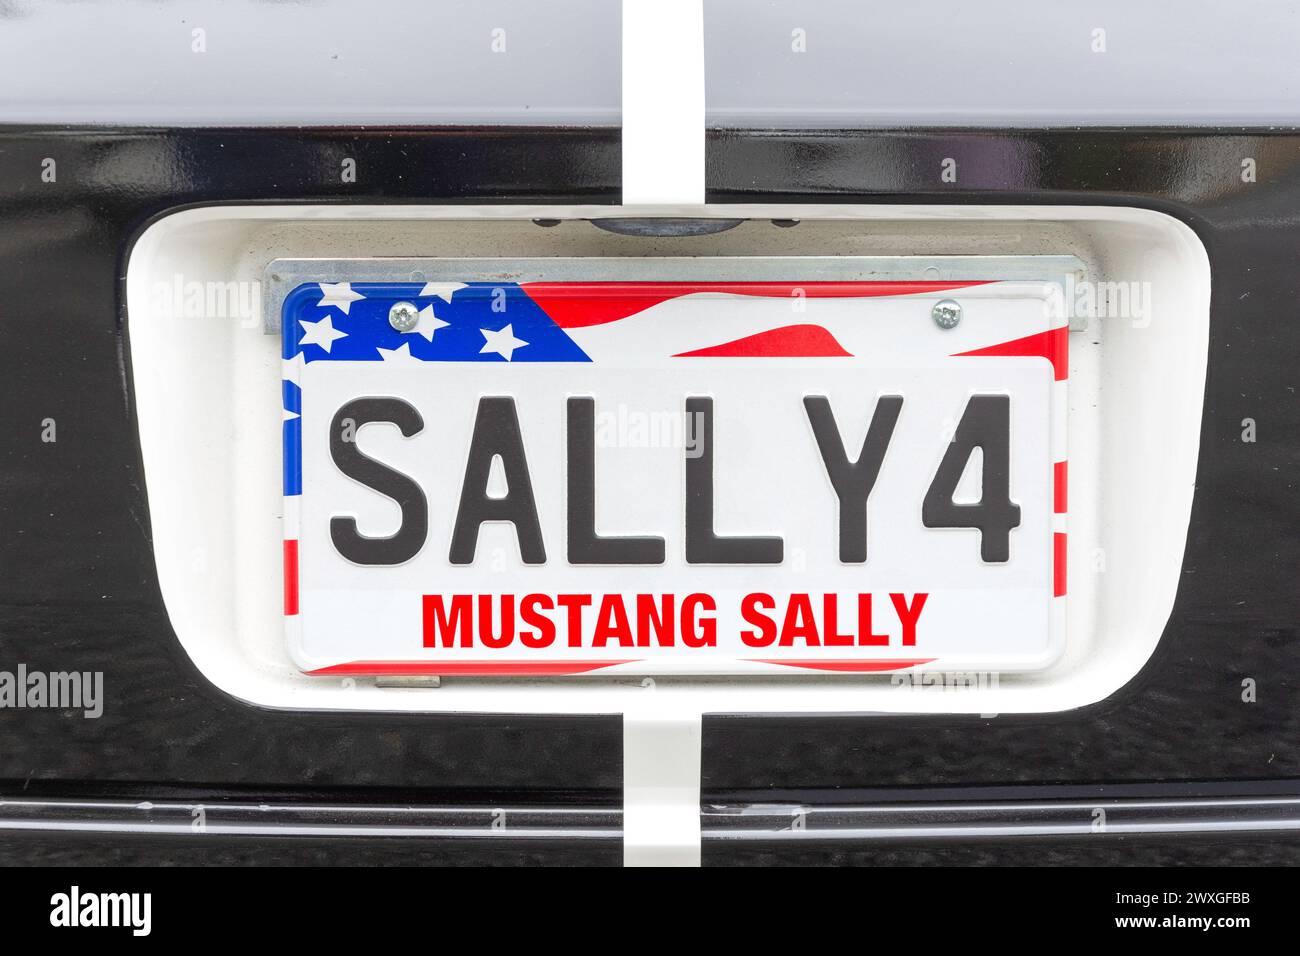 Mustang Sally (Sally4) car number plate on classic Mustang car, Cashmere, Christchurch, Canterbury, New Zealand Stock Photo